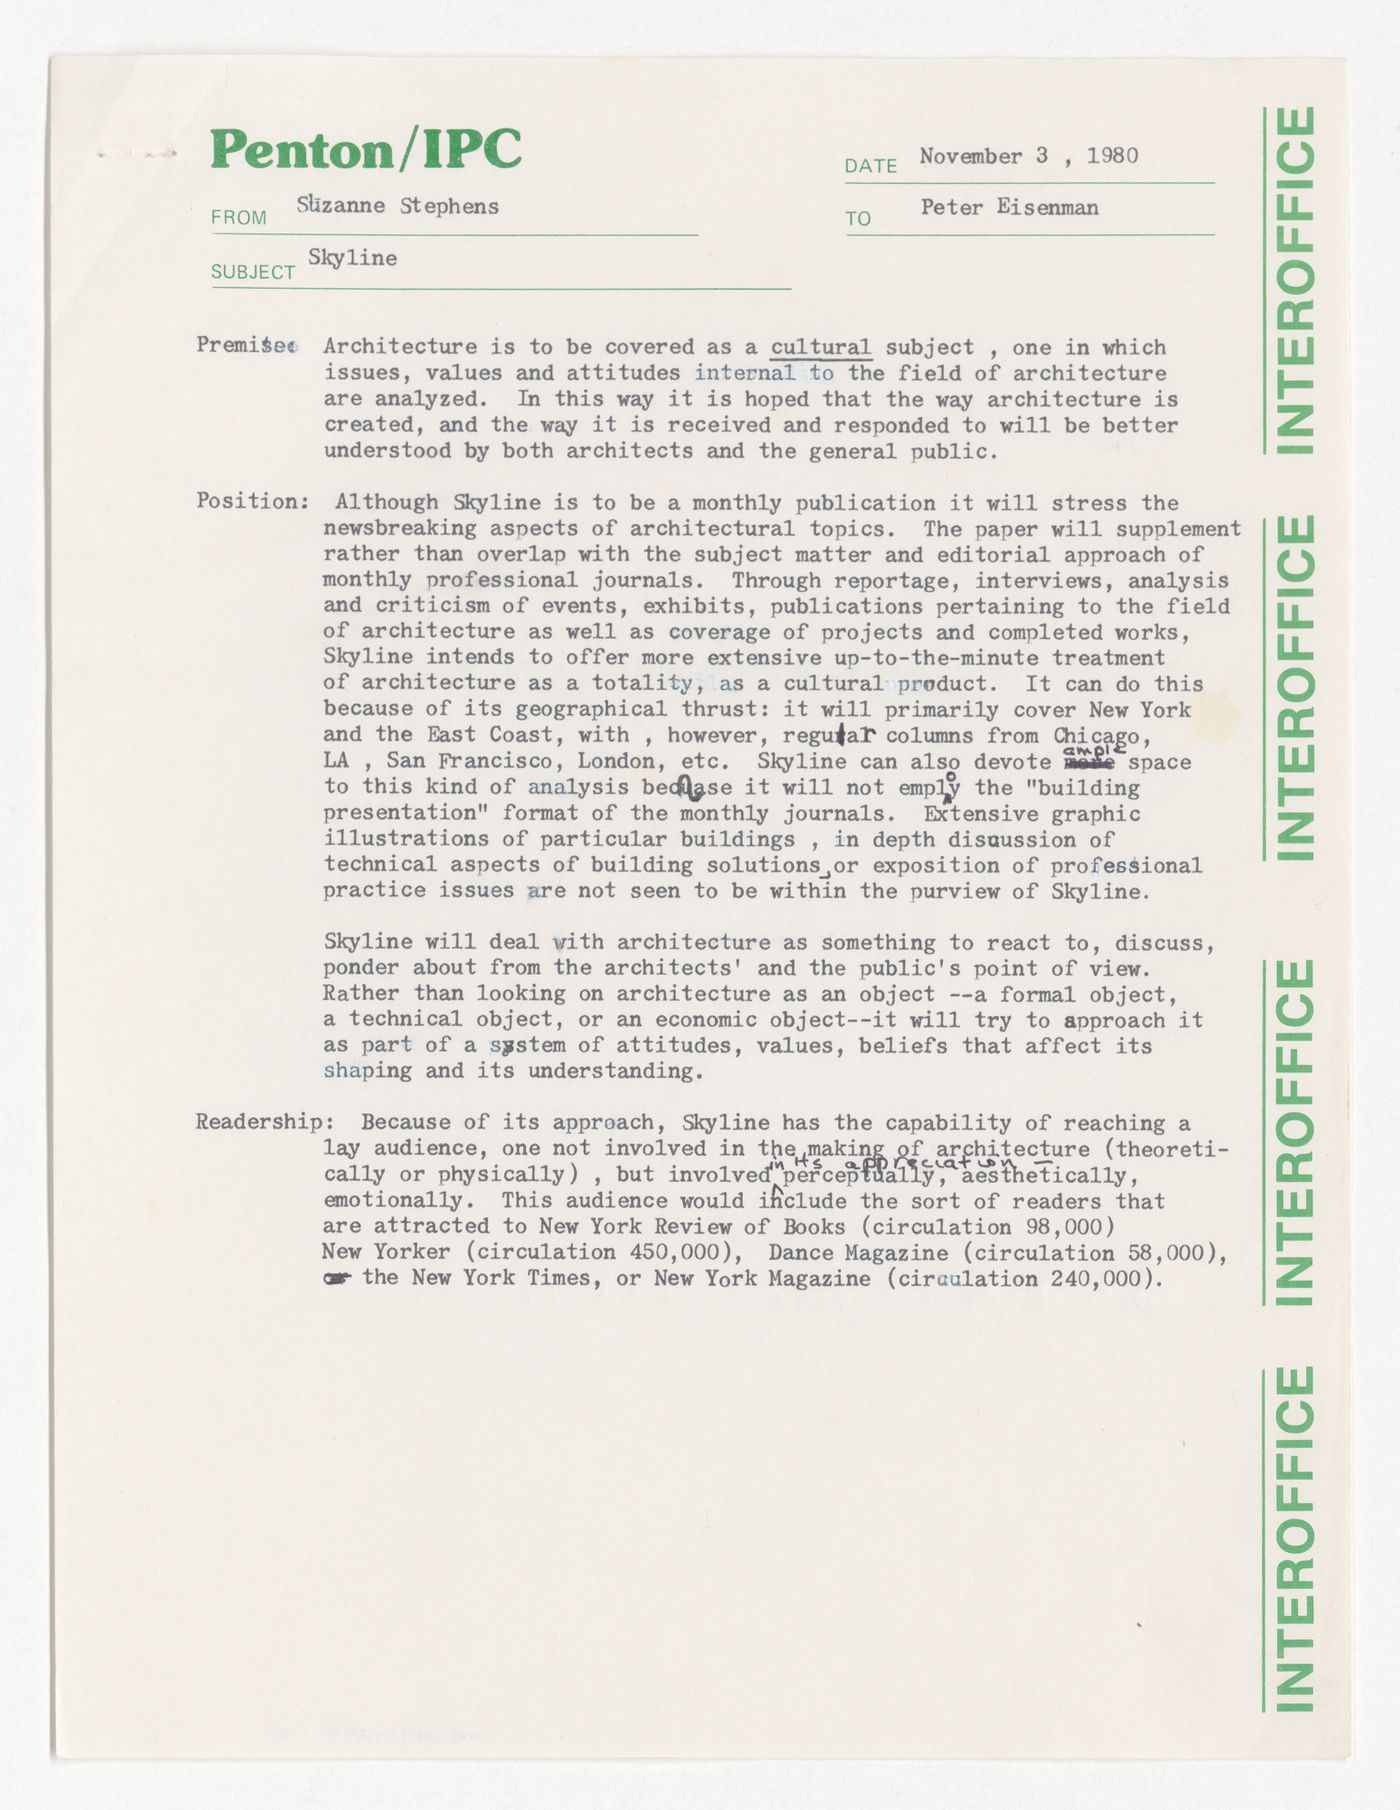 Memorandum from Suzanne Stephens to Peter D. Eisenman about editorial direction of Skyline